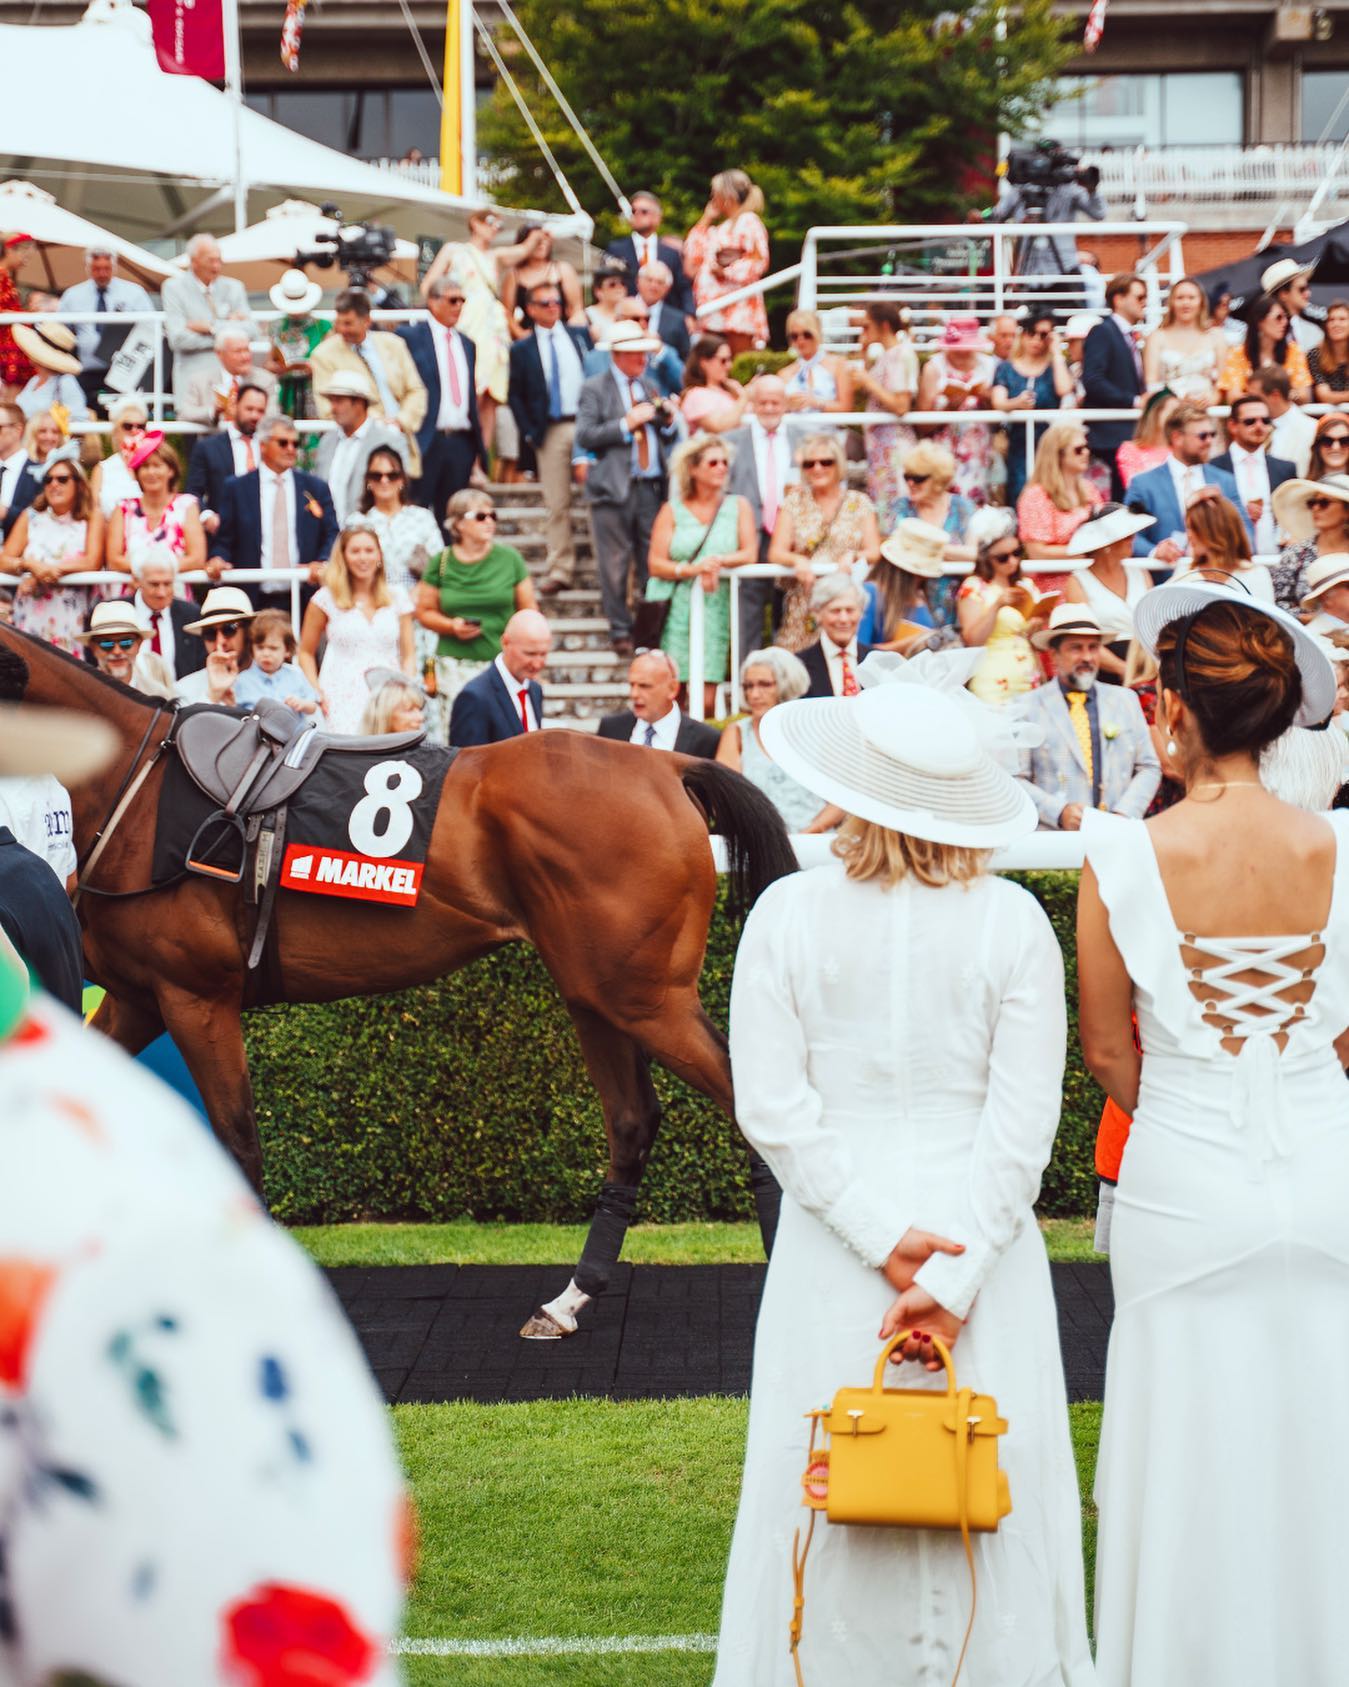 Glorious Goodwood, a social occasion like no other